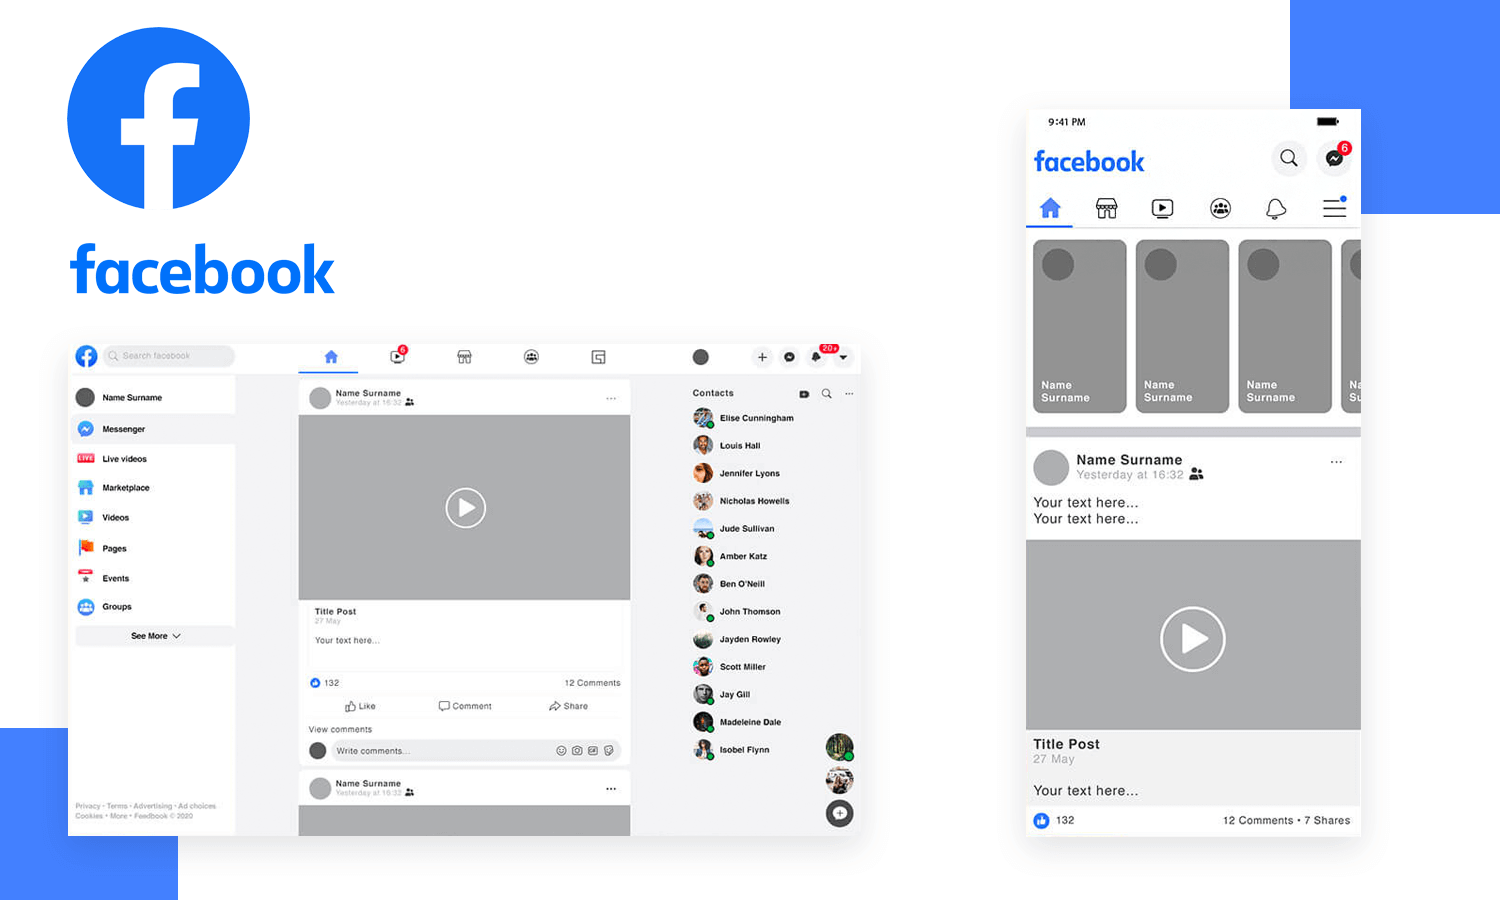 mockup example from facebook design style